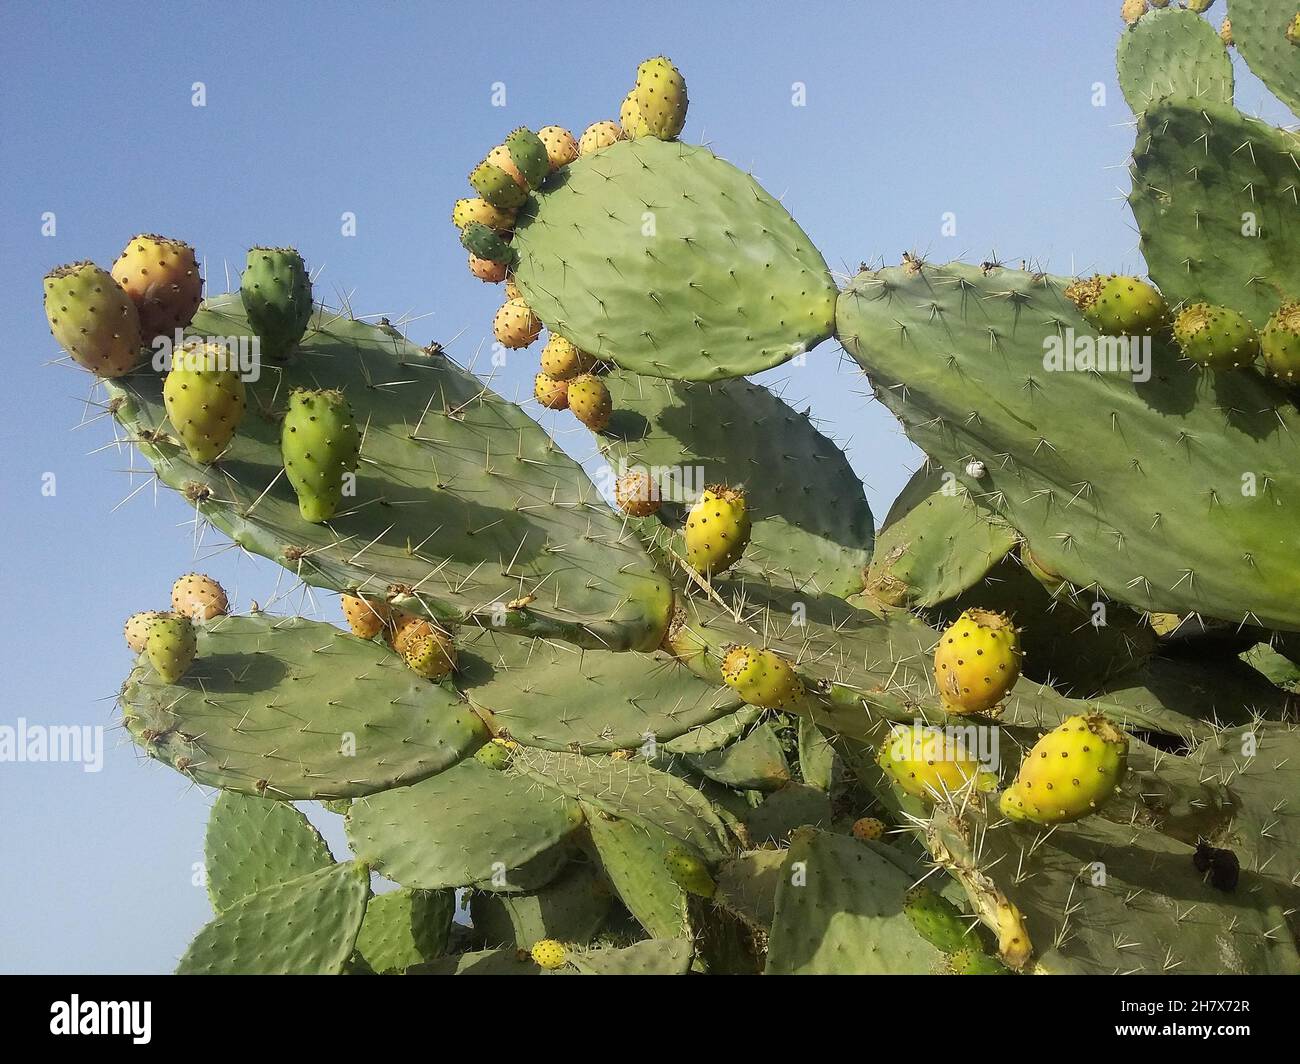 Prickly pear from Morocco in northern Africa Stock Photo